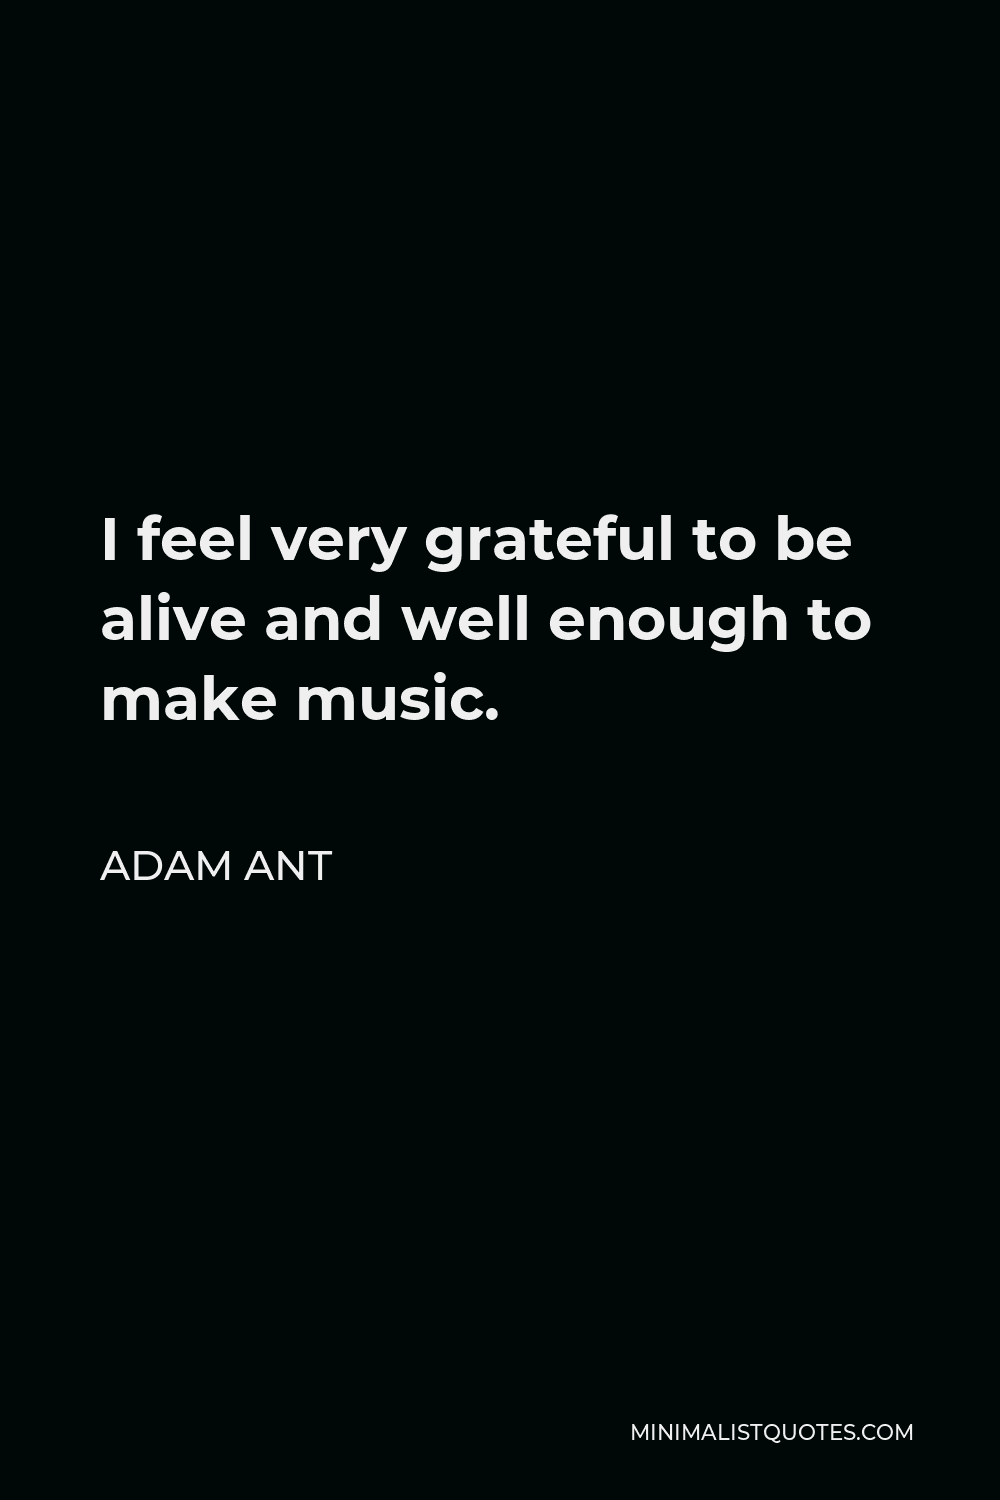 Adam Ant Quote - I feel very grateful to be alive and well enough to make music.